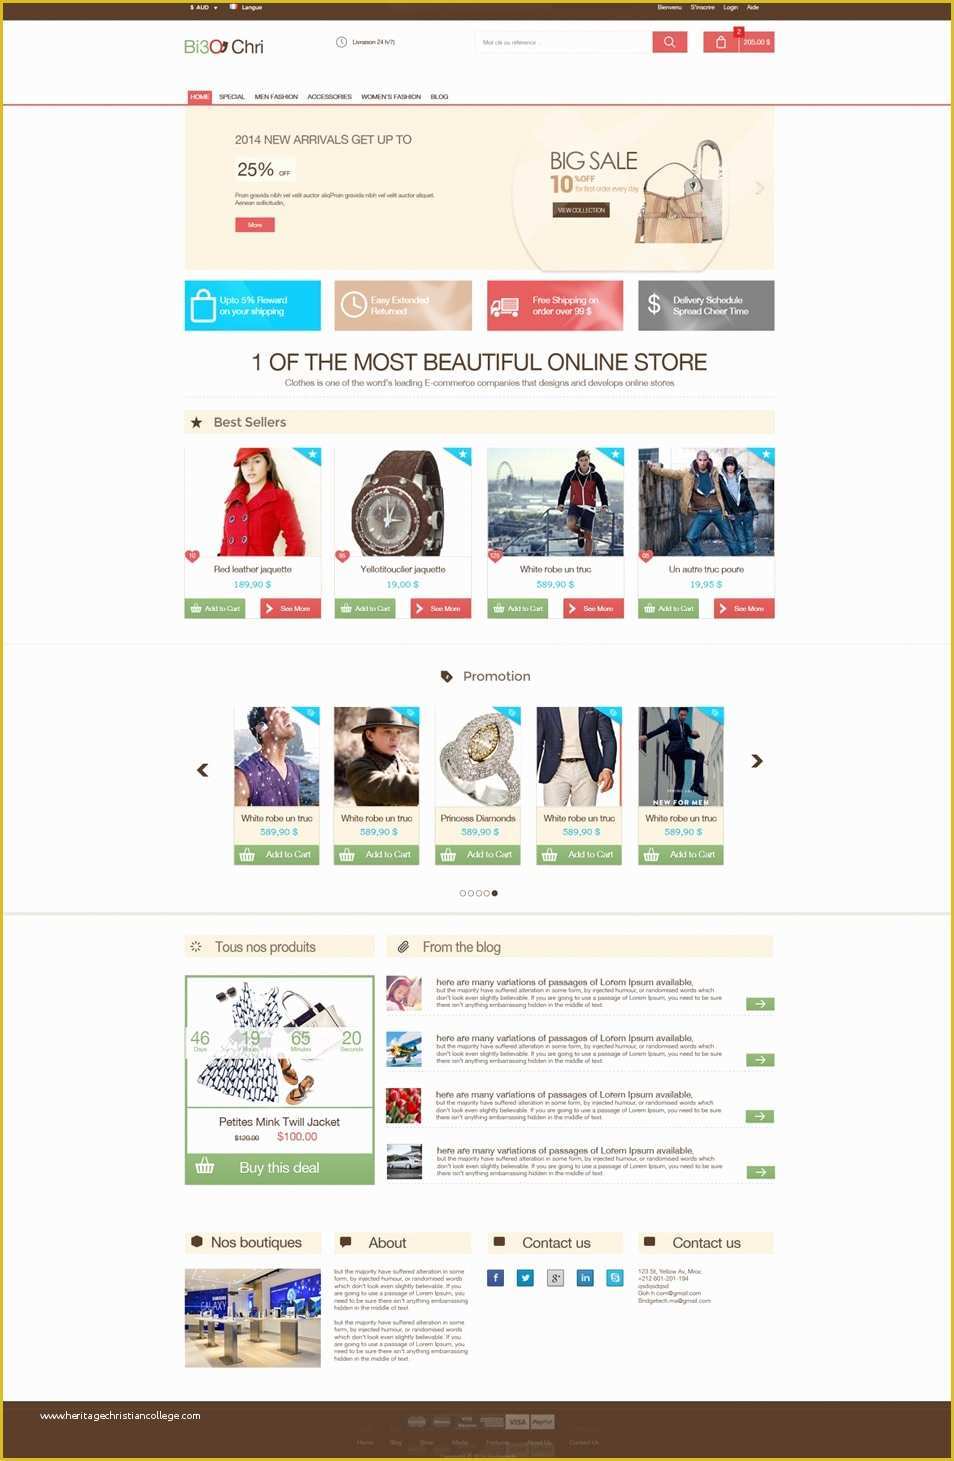 Free Ecommerce HTML Template Of HTML Use 20 Best Free Psd E Merce Web Templates 2014 or